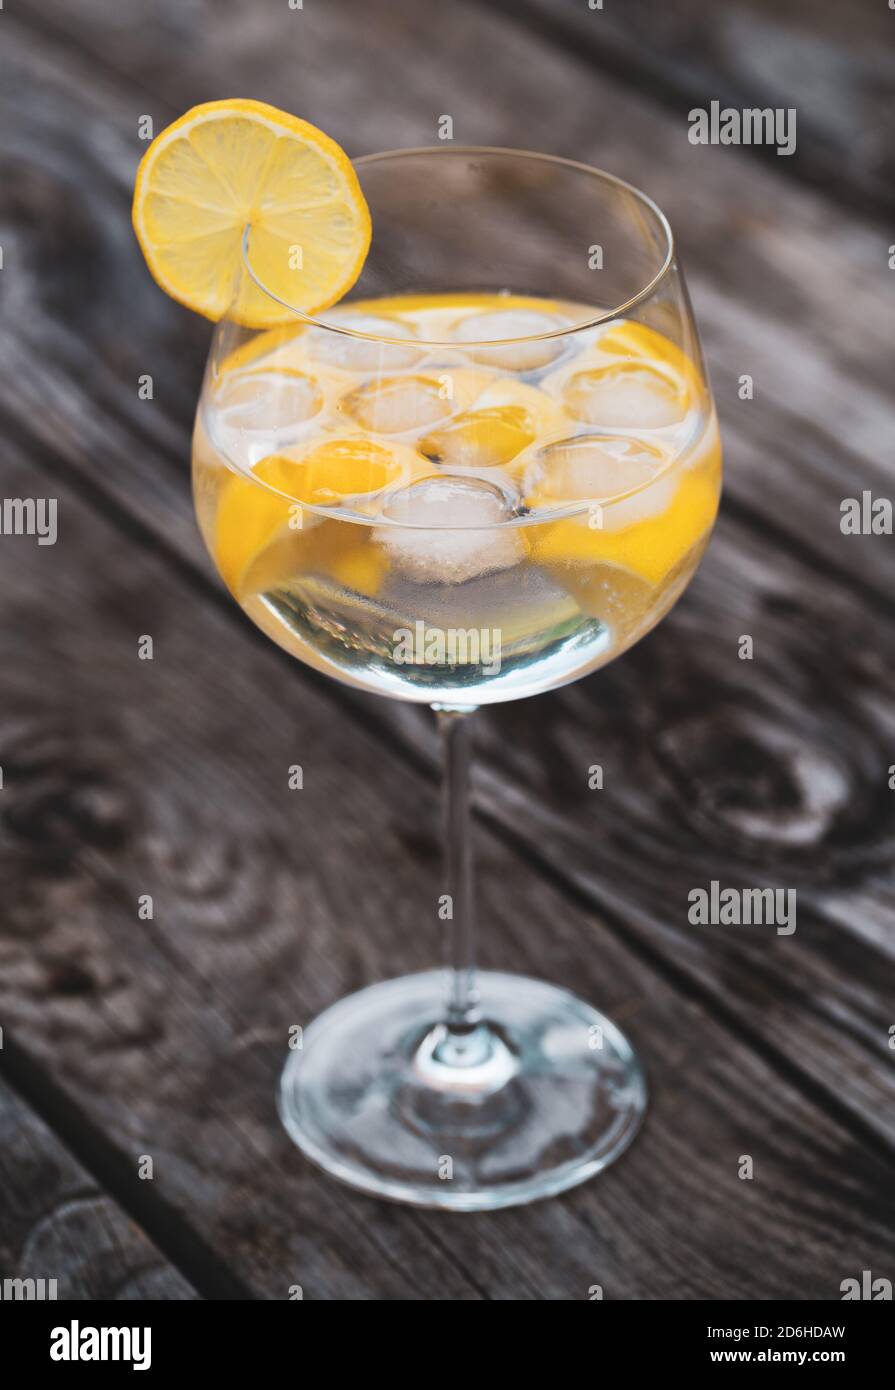 Glass of Gin and Tonic with pieces of lemon on a wooden table Stock Photo